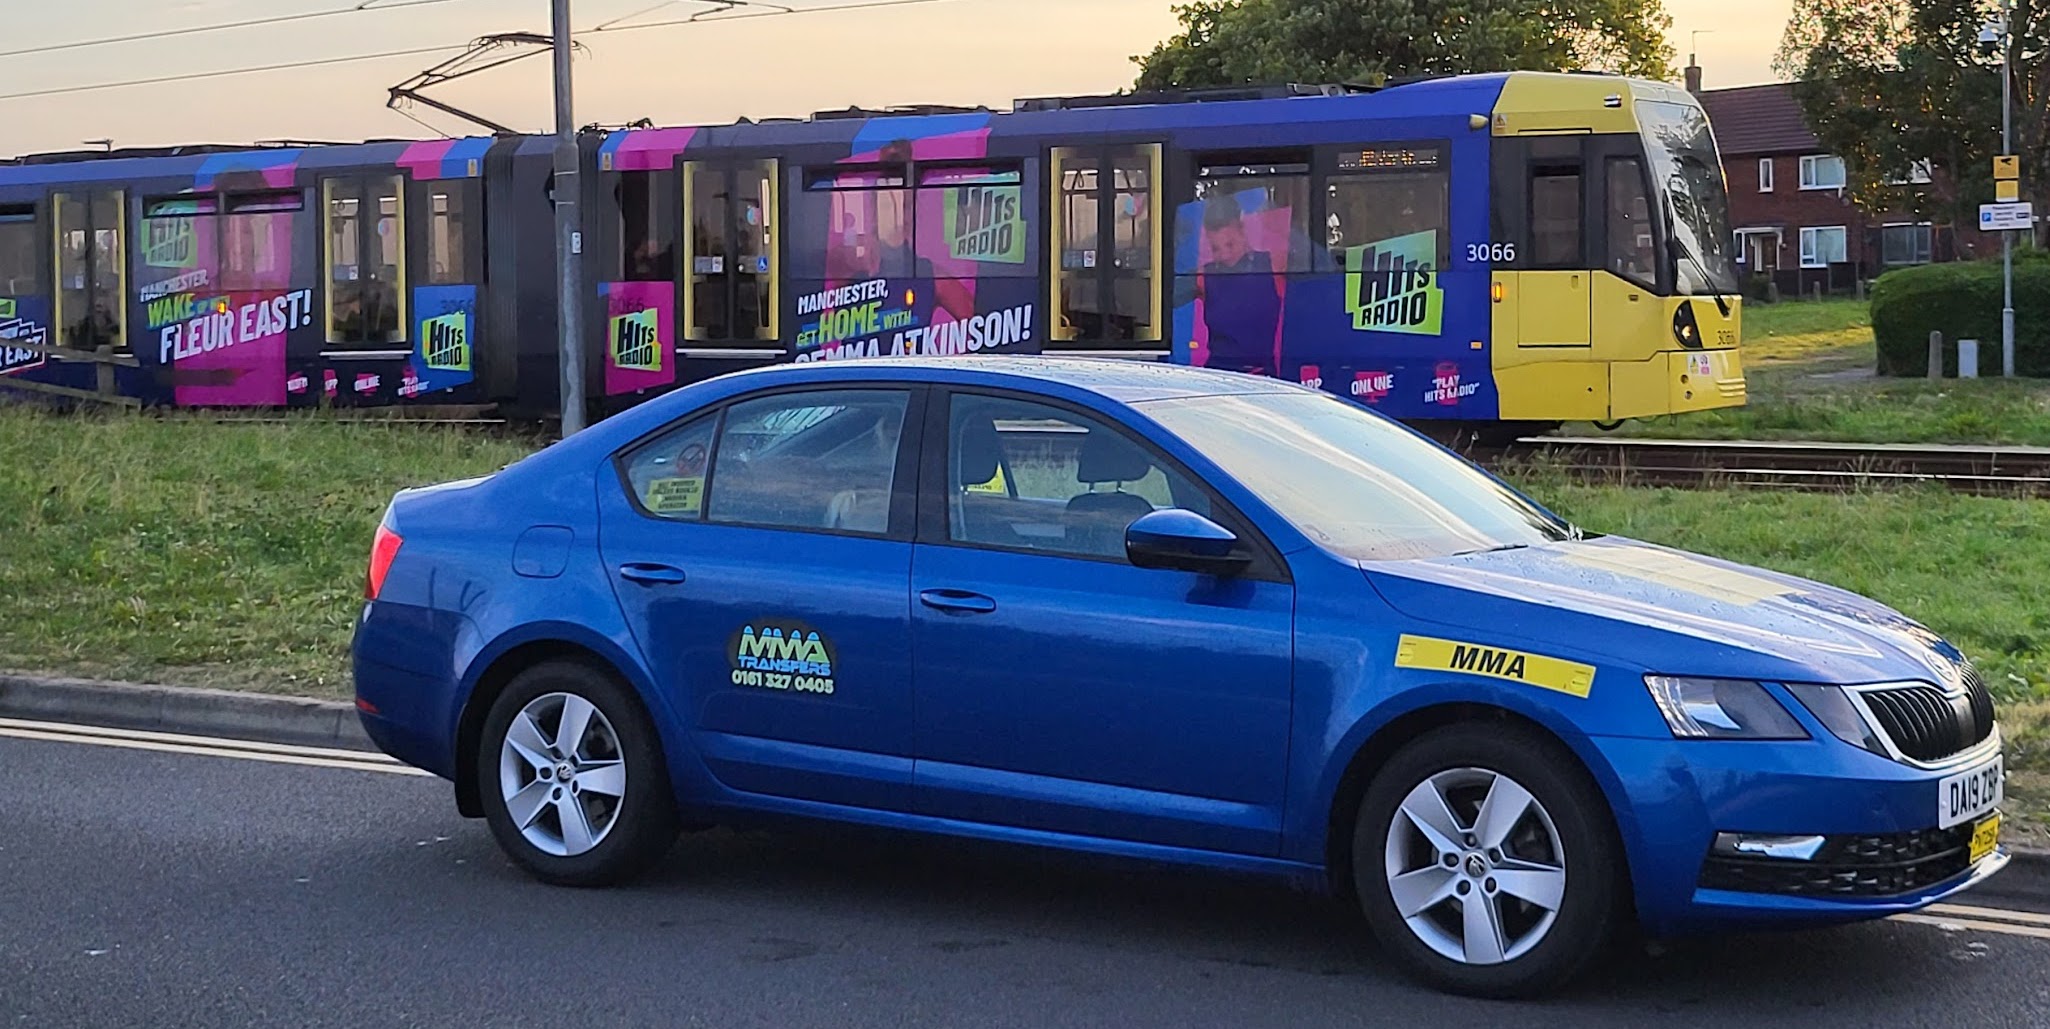 Taxis to Train Stations, Tram Stations, Seaports and Airports from Blackburn